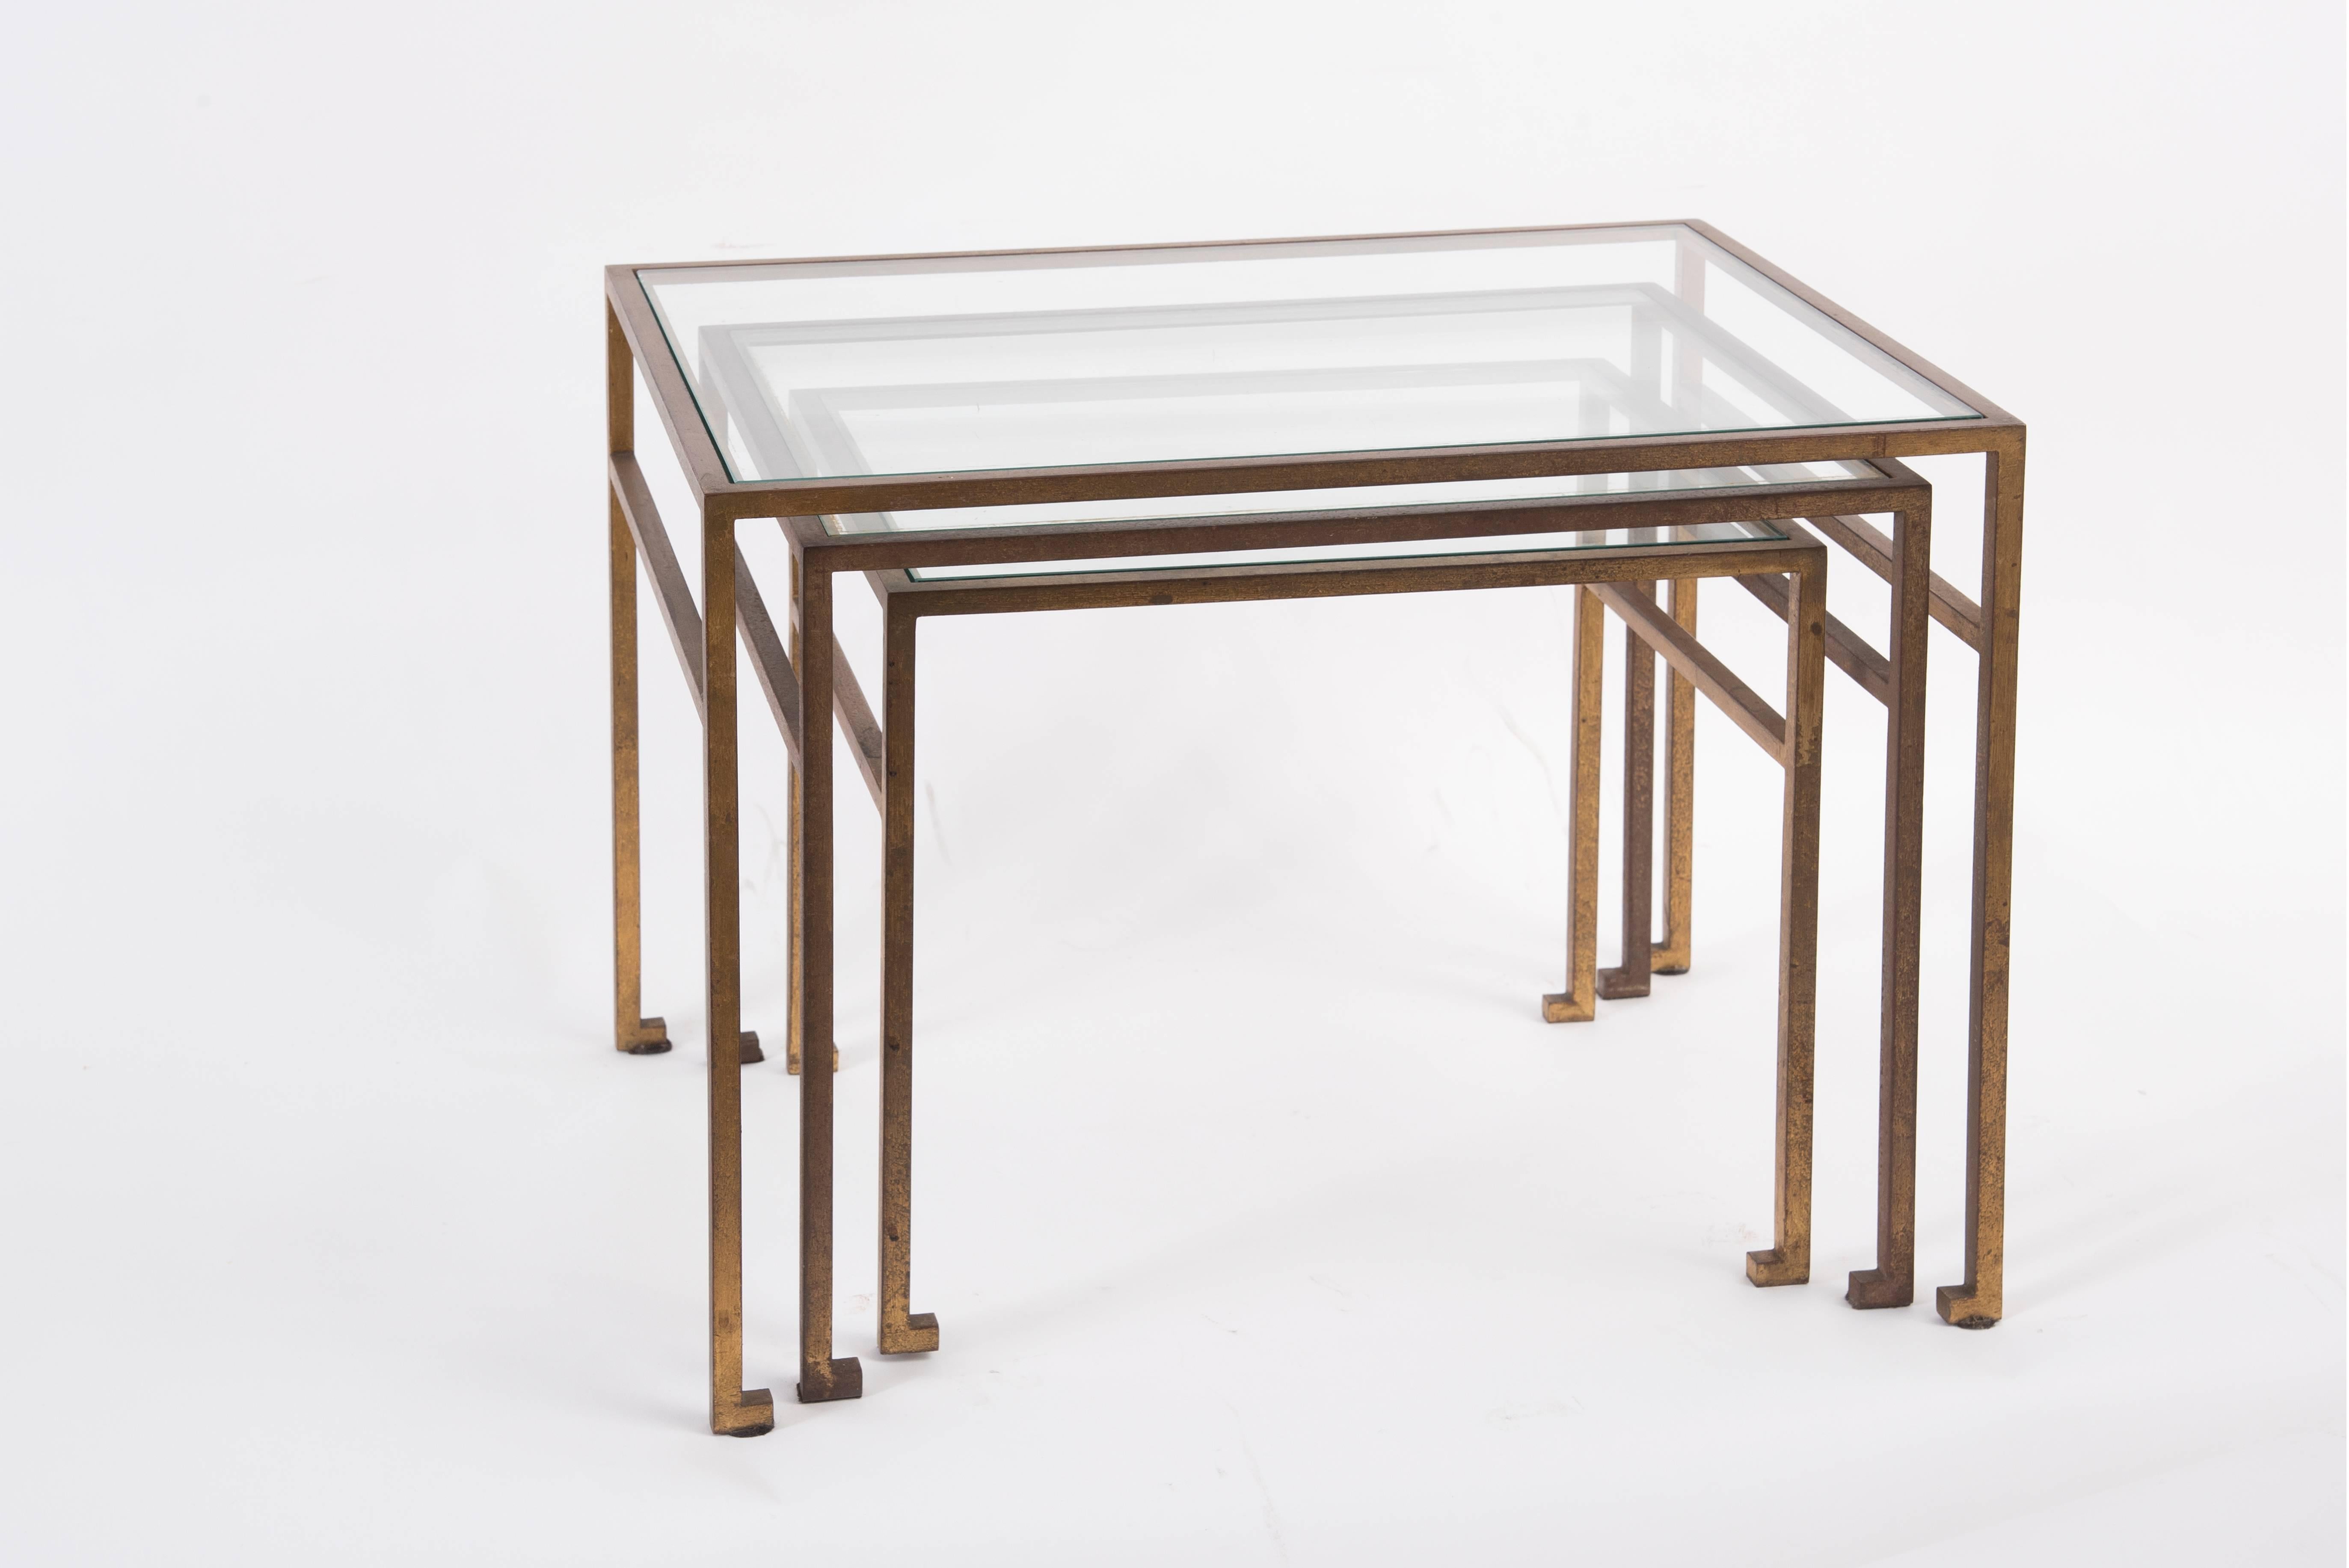 Ramsay House,
gigogne coffee table,
gilded iron and glass,
circa 1970, France.
Measures of the highest to the lowest:
1 / Height: 41 cm, width 53 cm, depth: 38 cm,
2 / Height: 38 cm, width 46 cm, depth: 34 cm,
3 / Height: 34 cm, width 39 cm,